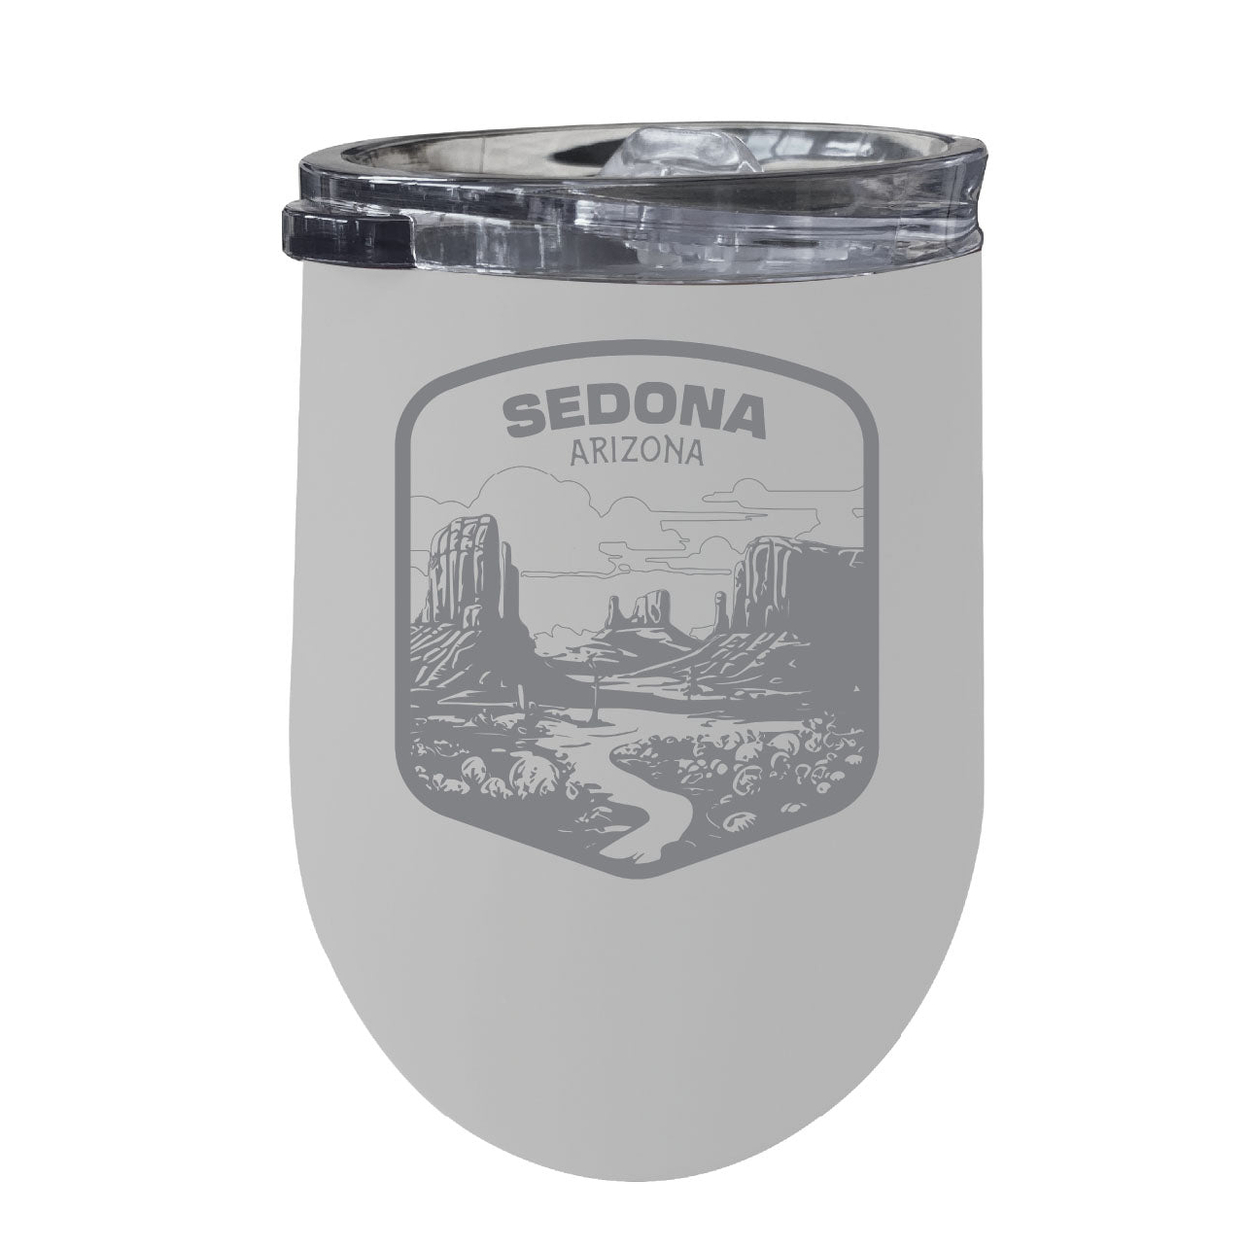 Sedona Arizona Souvenir 12 Oz Engraved Insulated Wine Stainless Steel Tumbler - Coral,,2-Pack